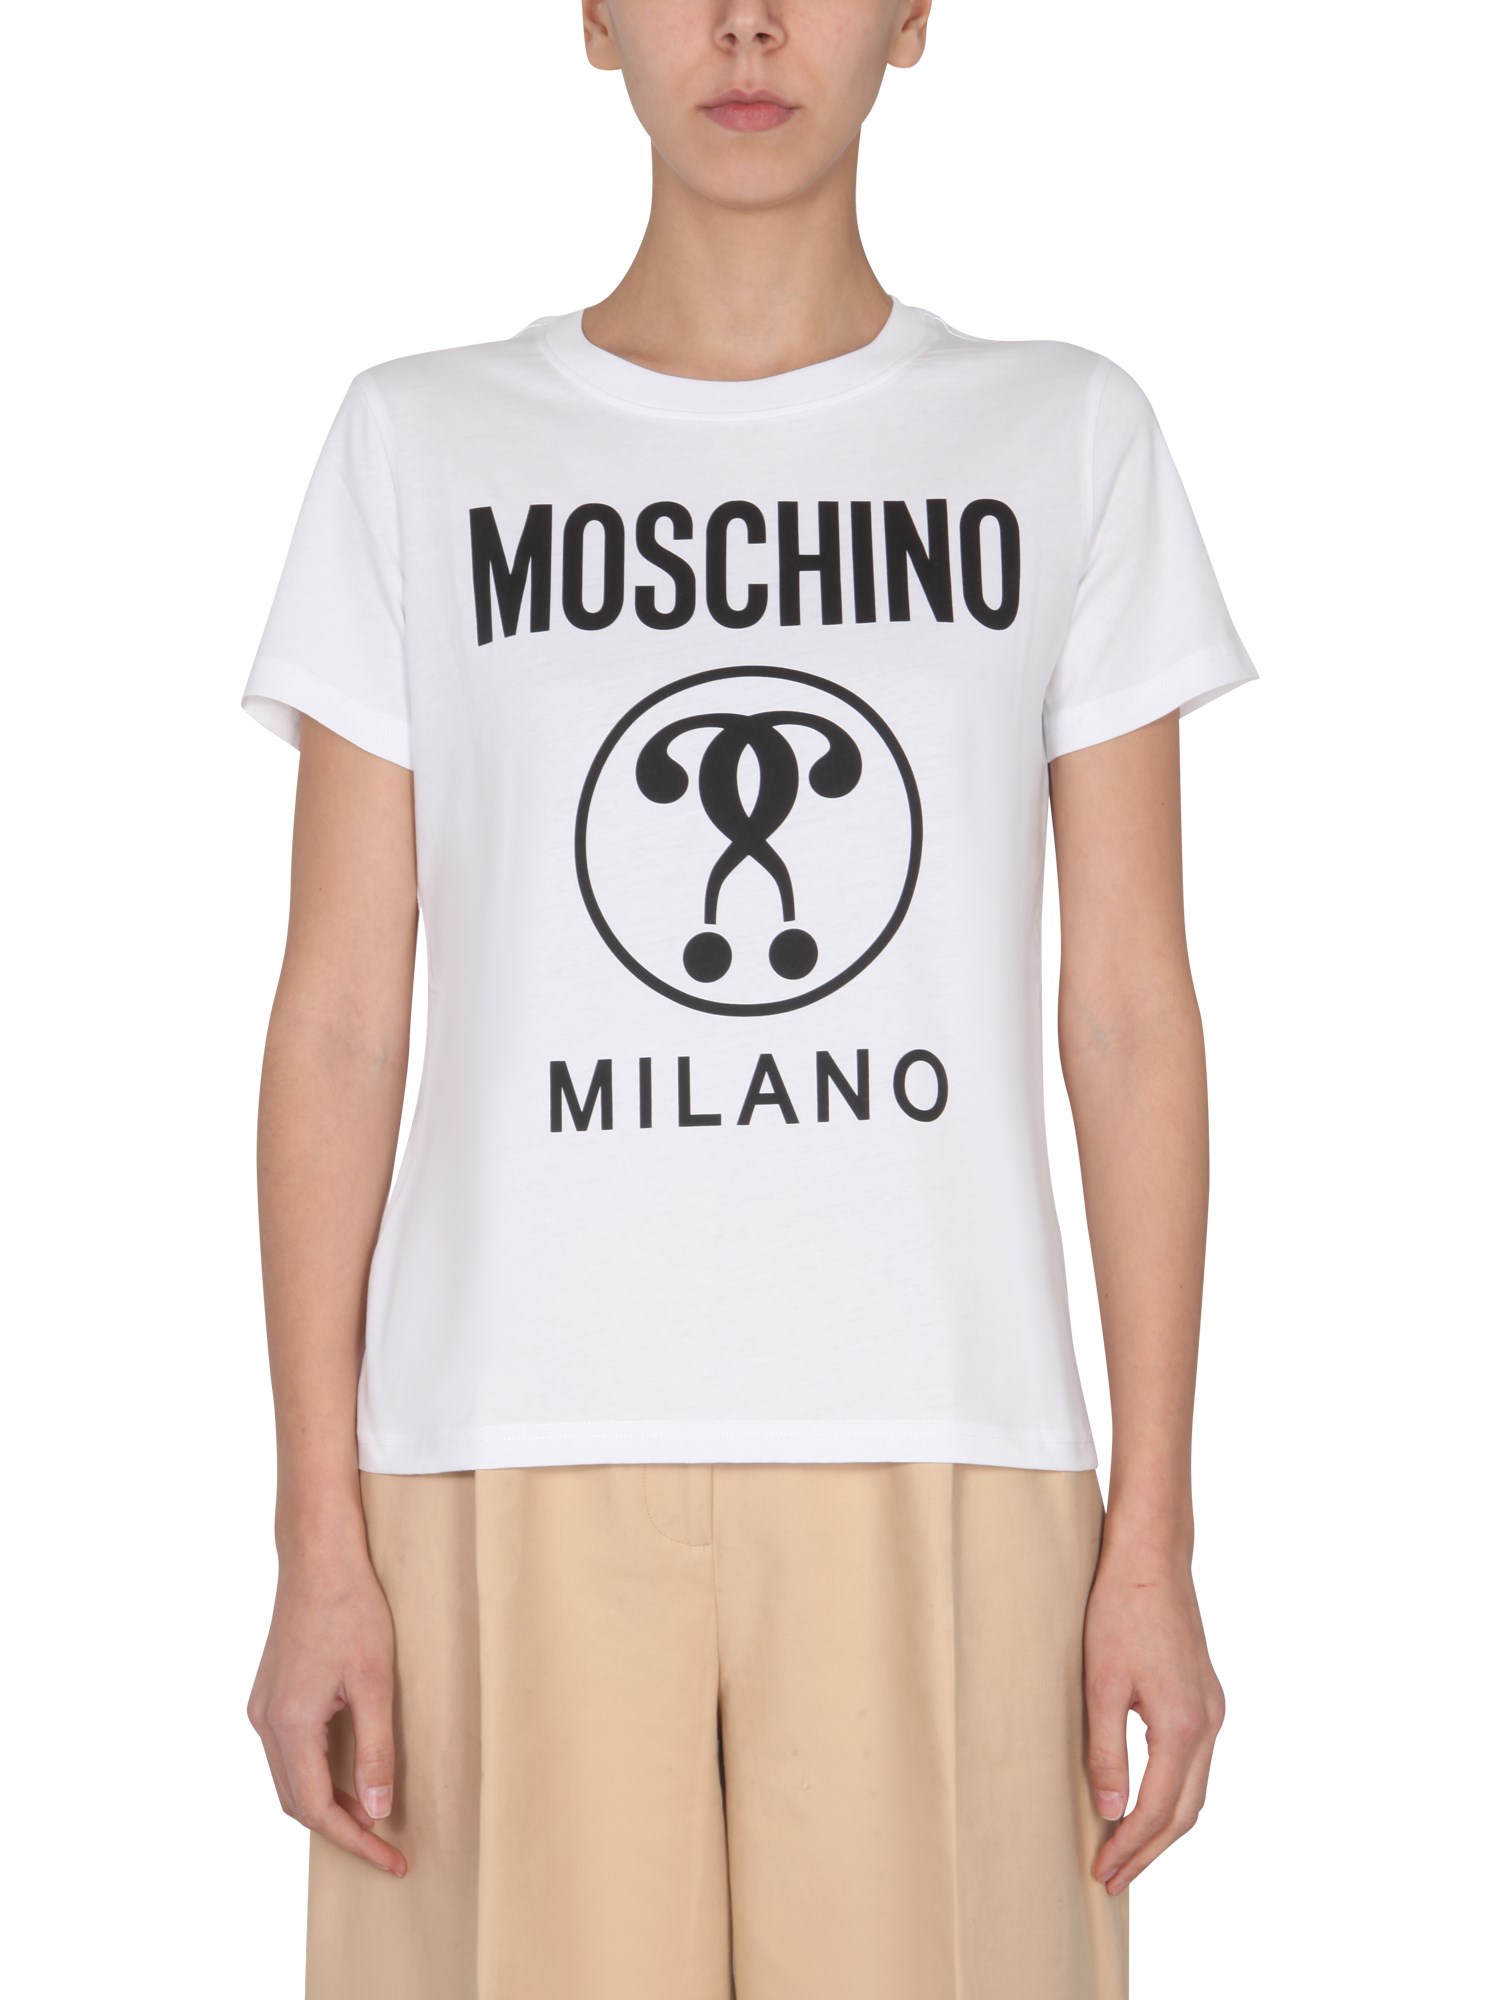 moschino "double question" t-shirt